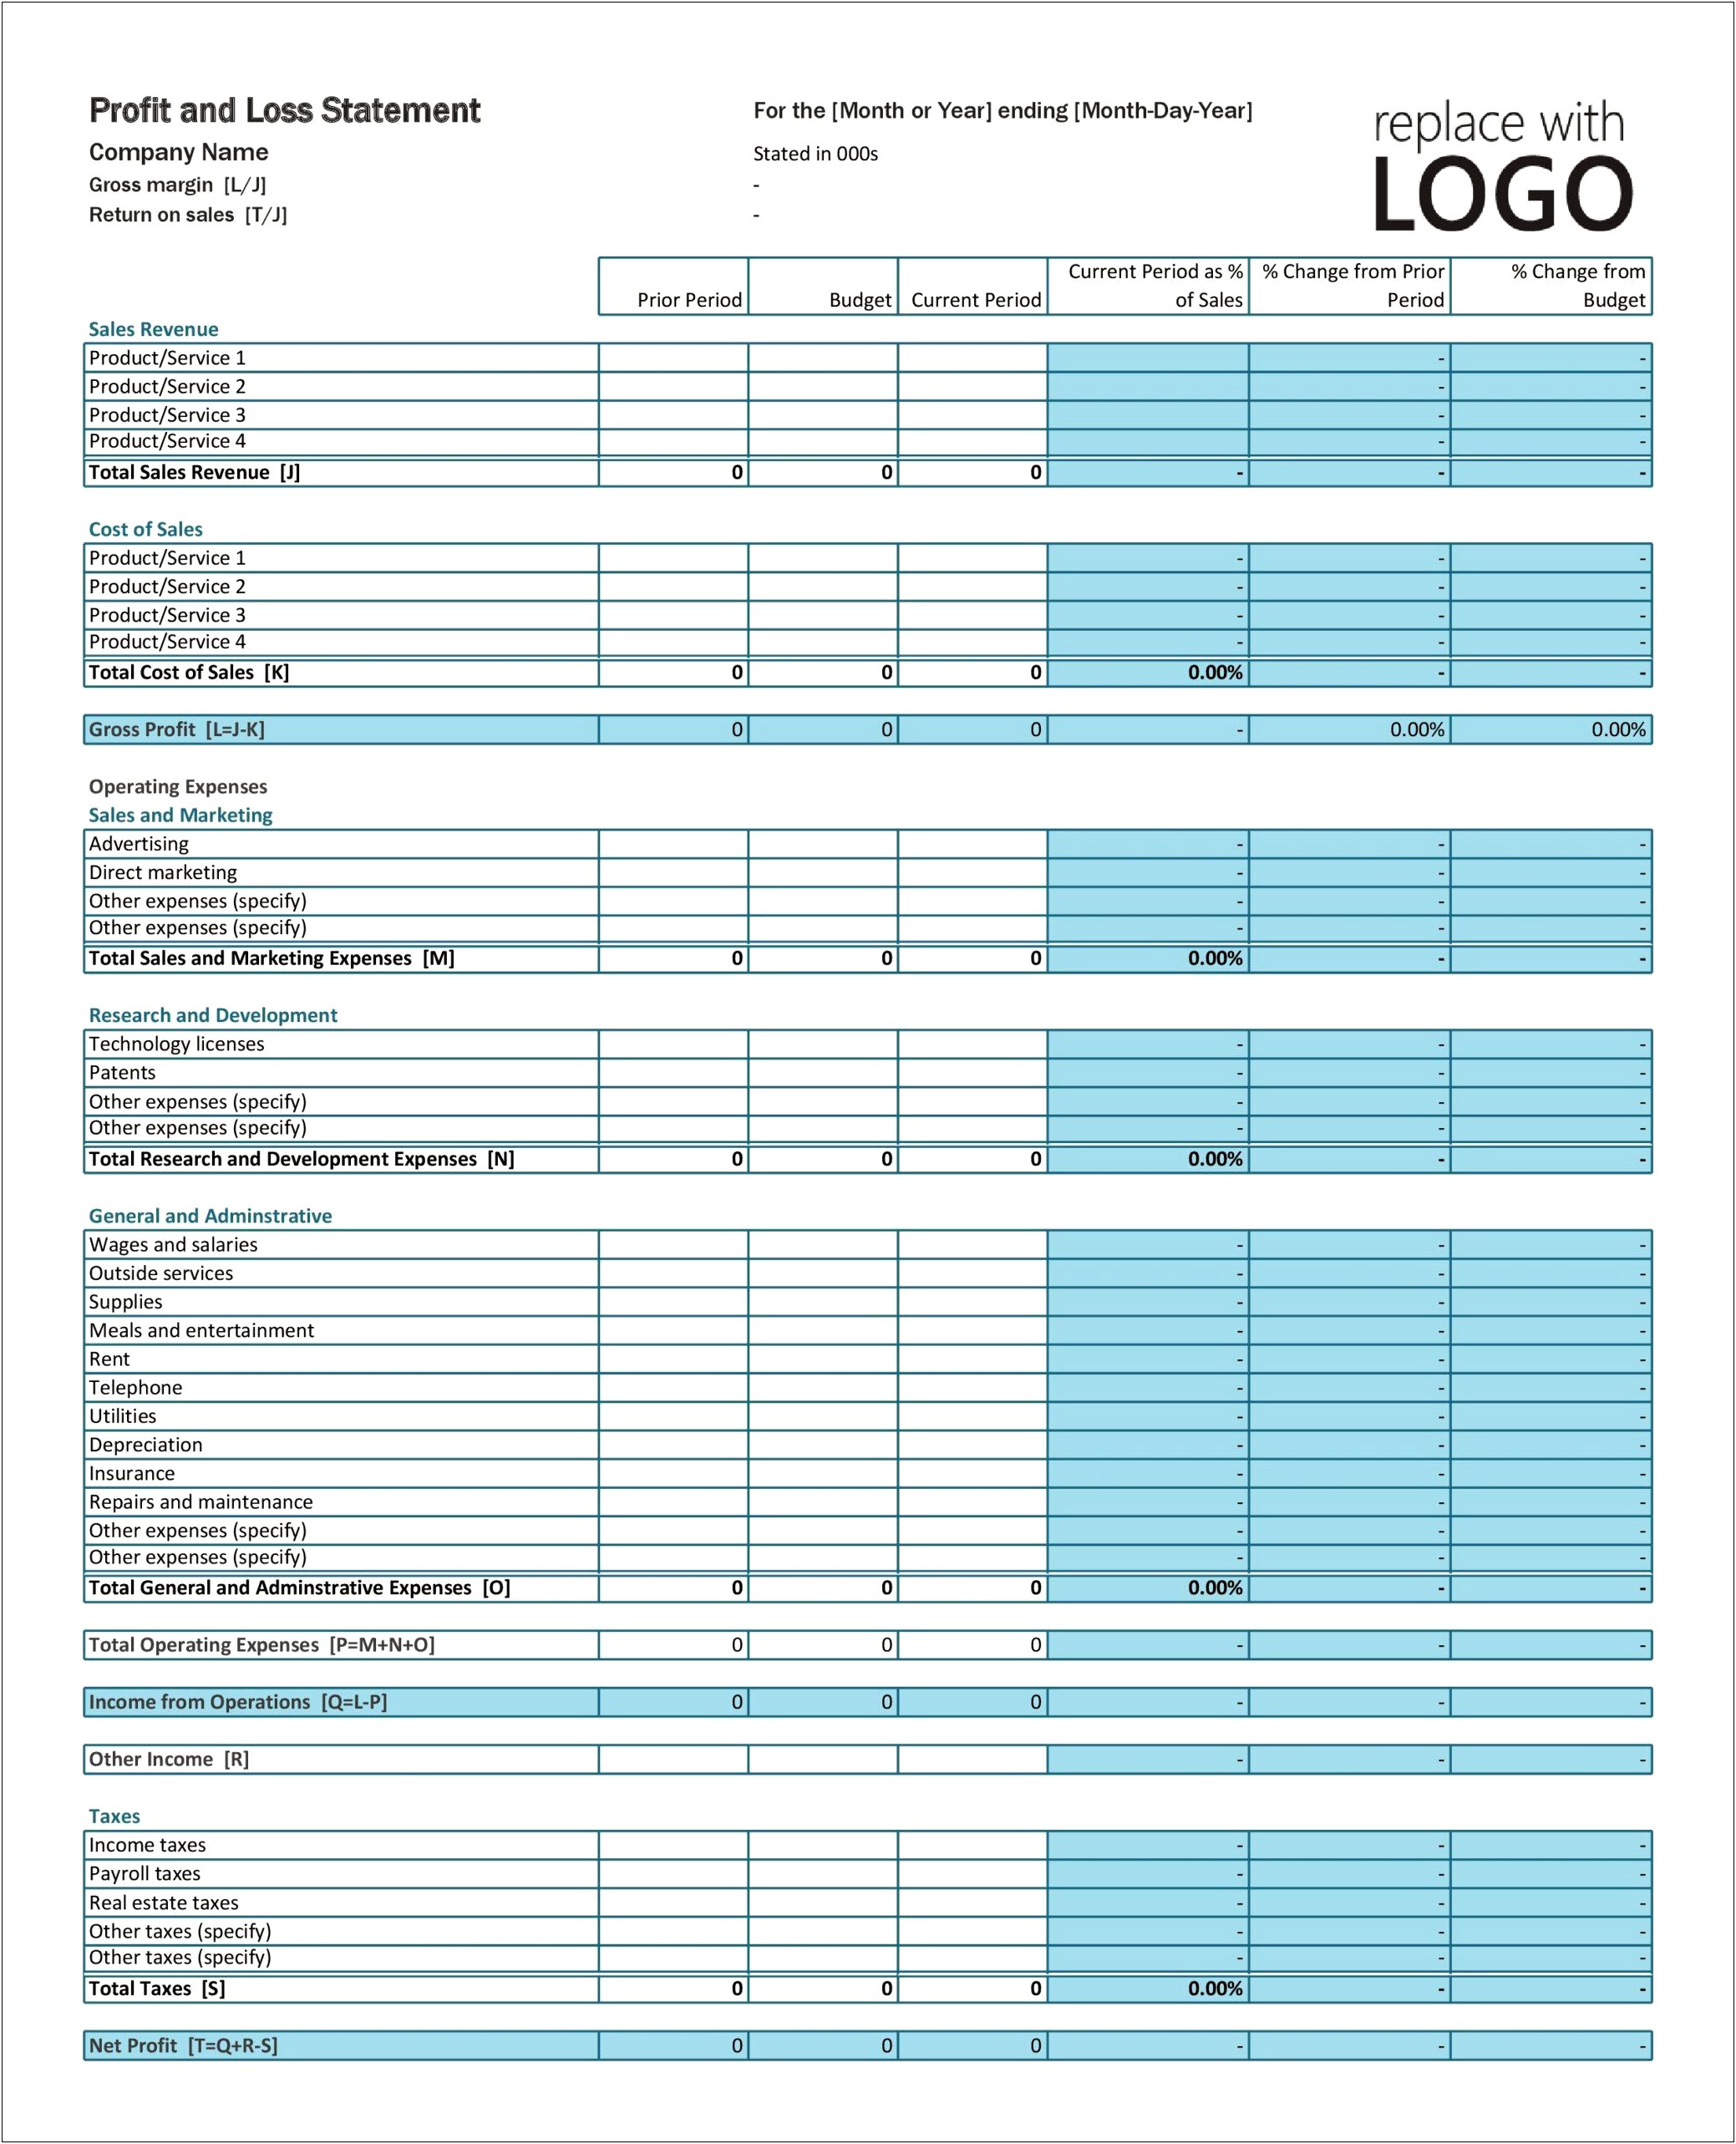 profit-and-loss-worksheet-template-free-templates-resume-designs